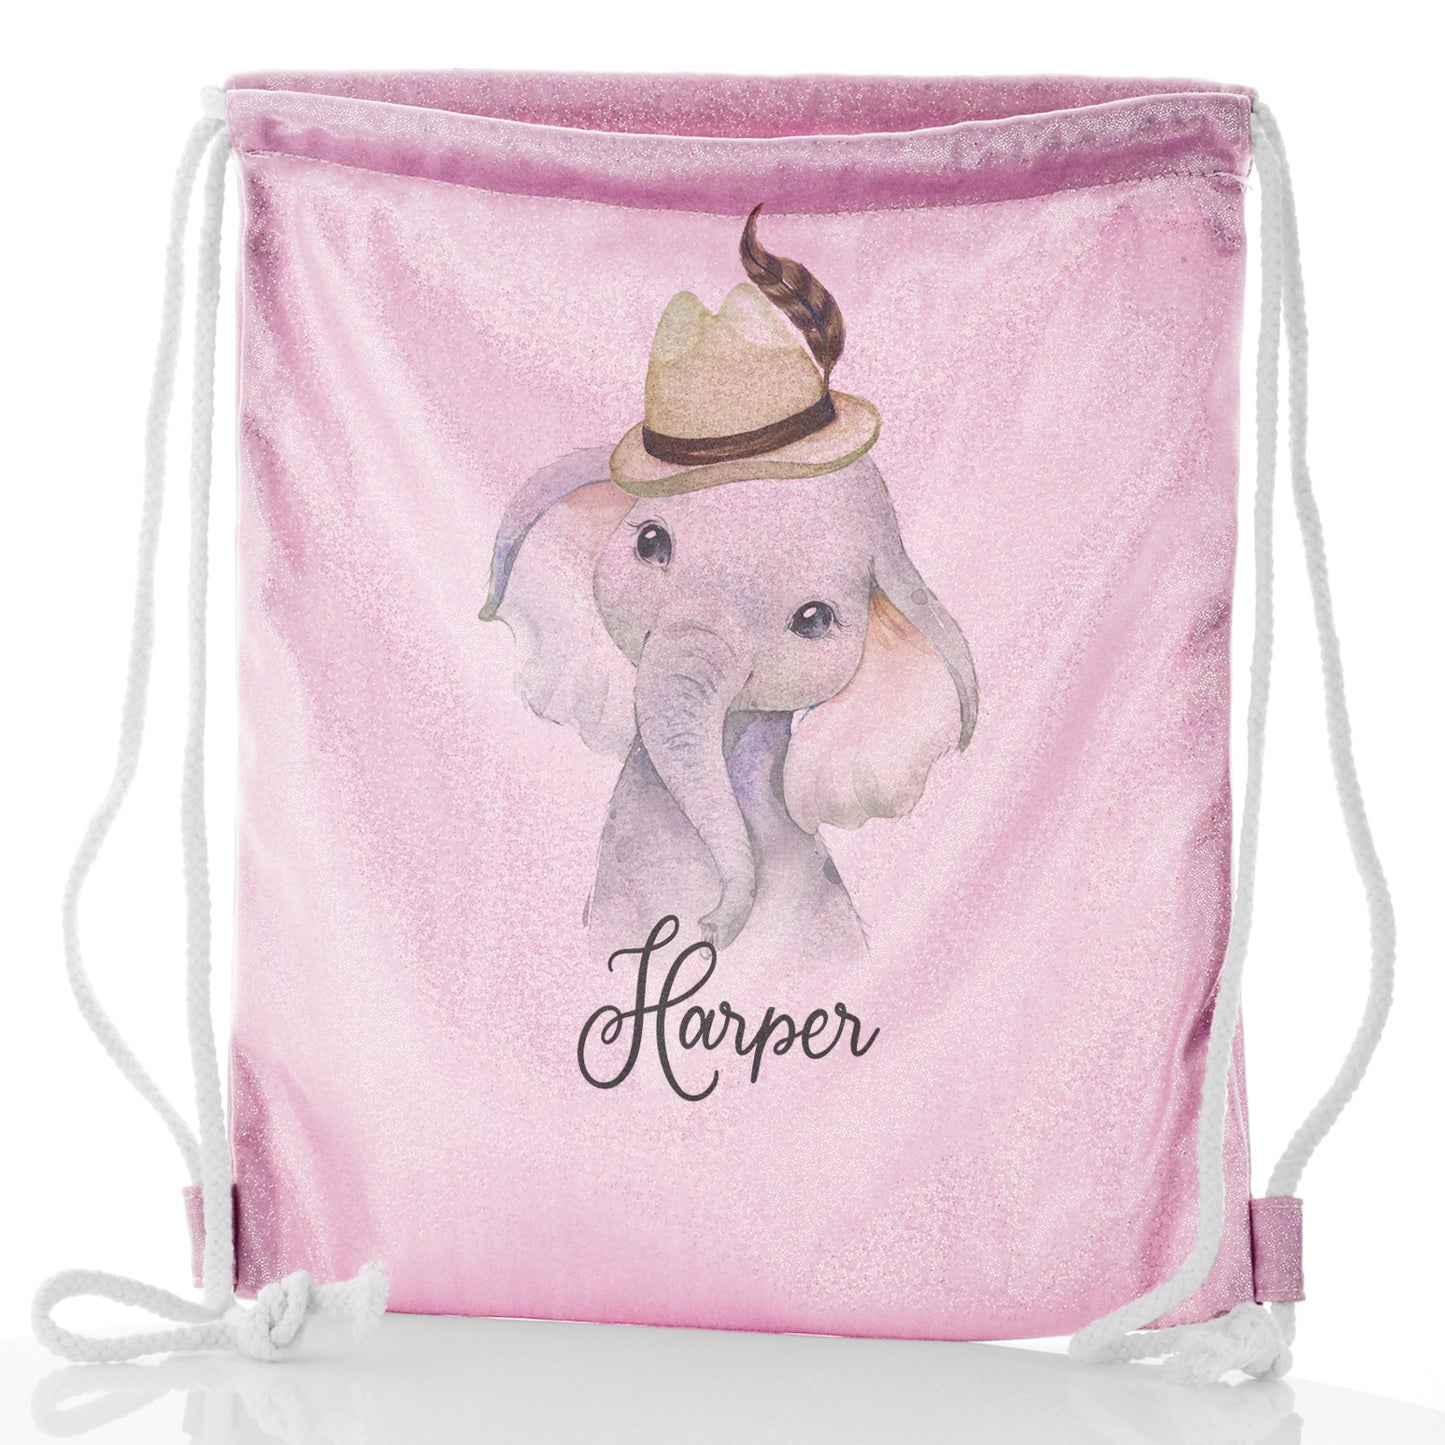 Personalised Glitter Drawstring Backpack with Grey Elephant Feather Hat and Cute Text